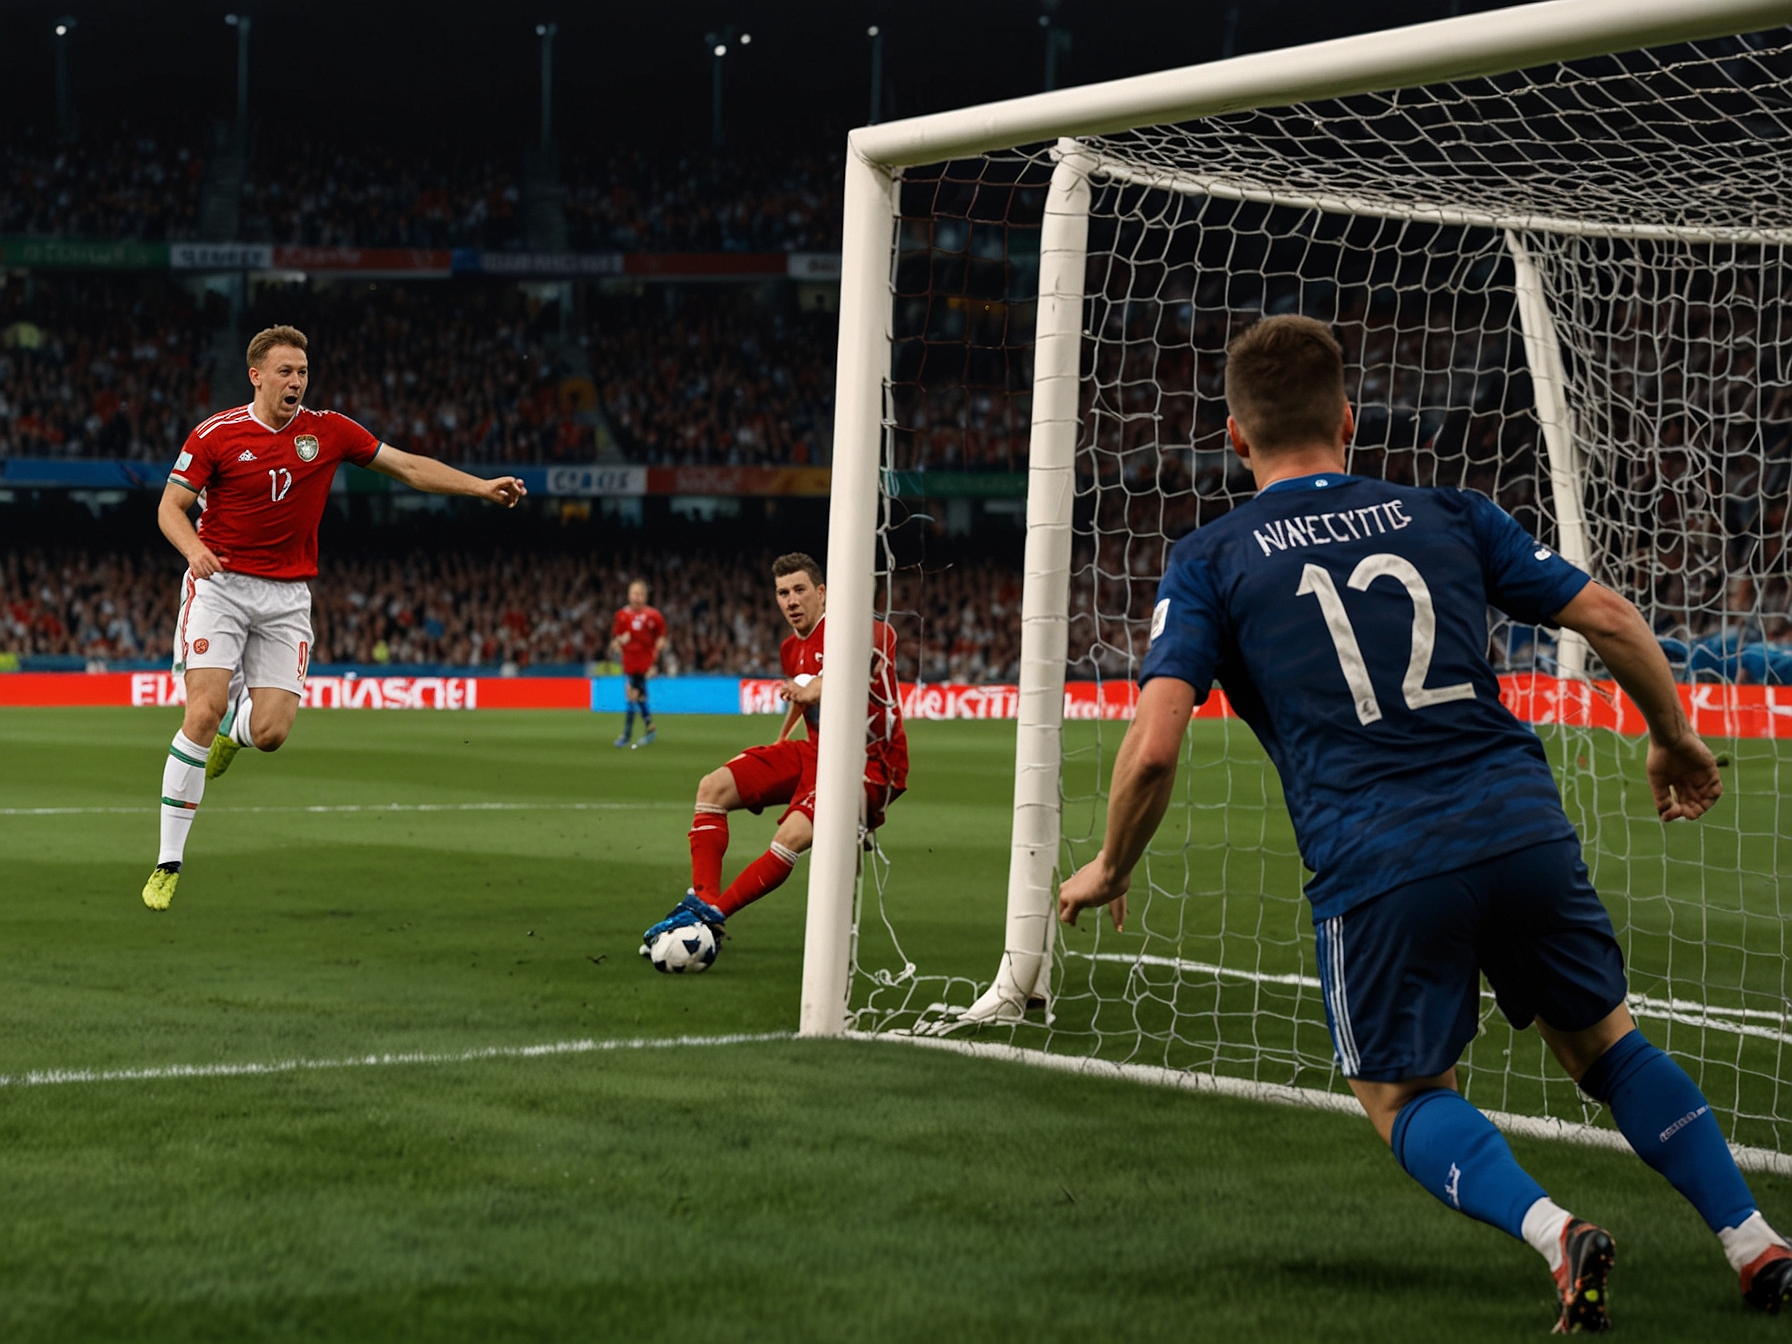 Kevin Csoboth's dramatic 100th-minute goal for Hungary against Scotland, a moment that kept Hungary's EURO 2024 hopes alive and led to Scotland's elimination from the tournament.